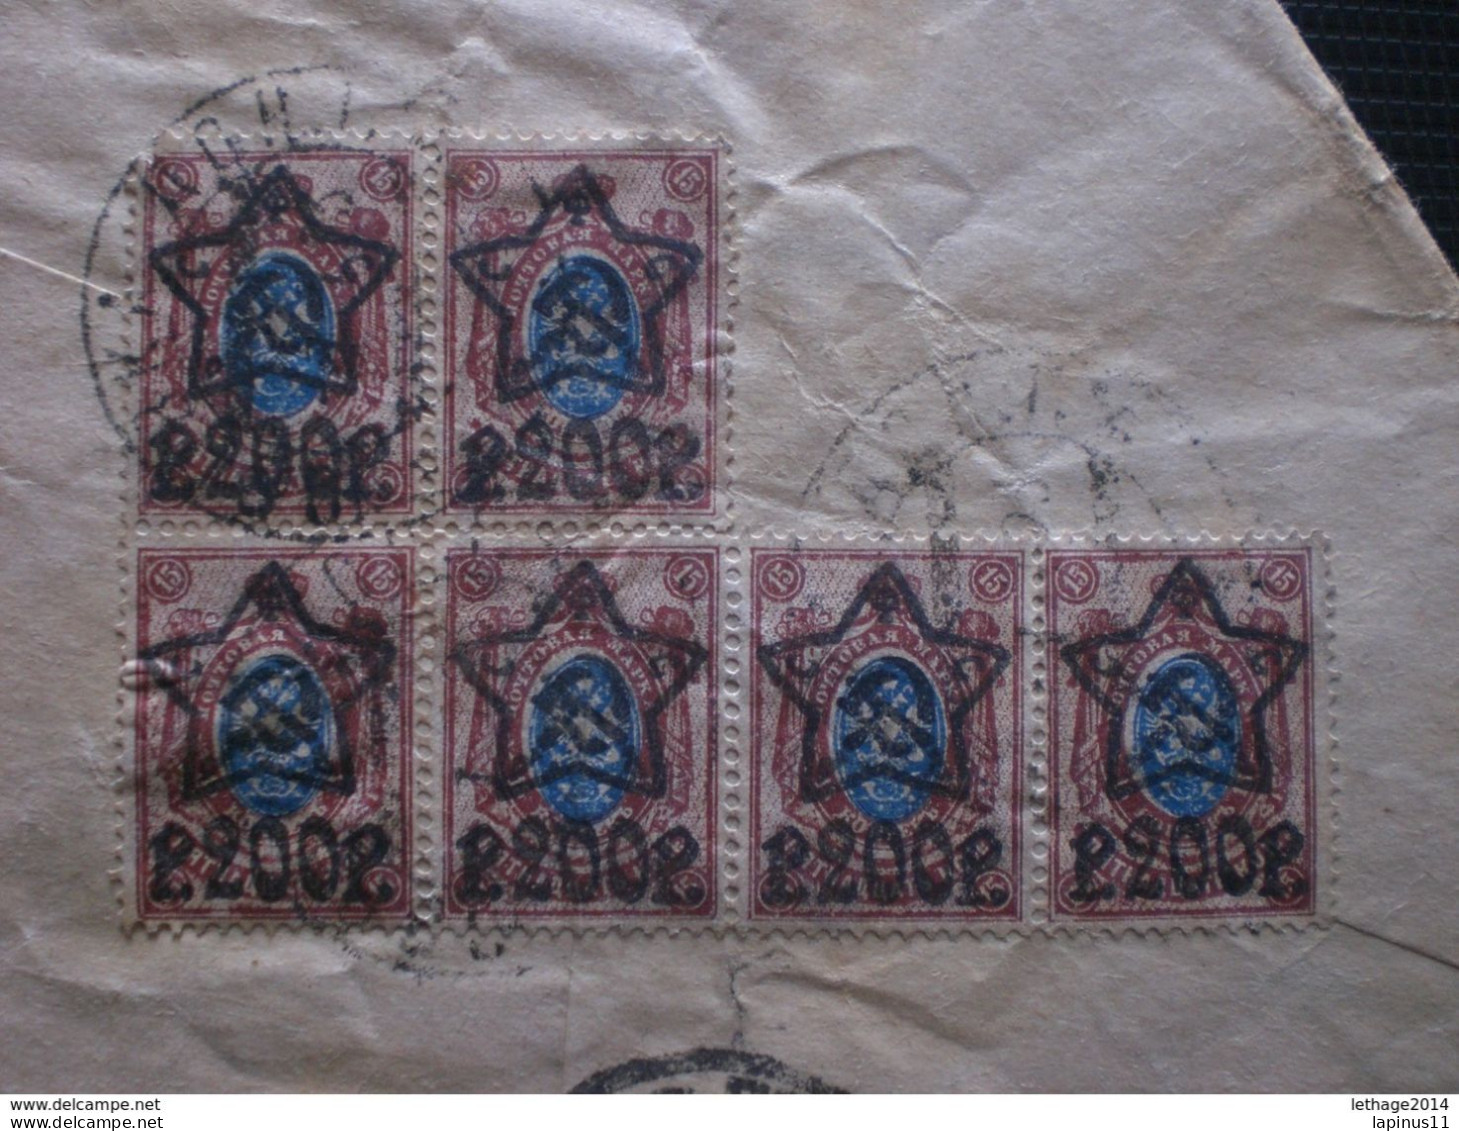 RUSSIA RUSSIE РОССИЯ STAMPS COVER 1923 RUSSIE TO ITALY FULL STAMPS RRR RIF.TAGG. (79) - Brieven En Documenten